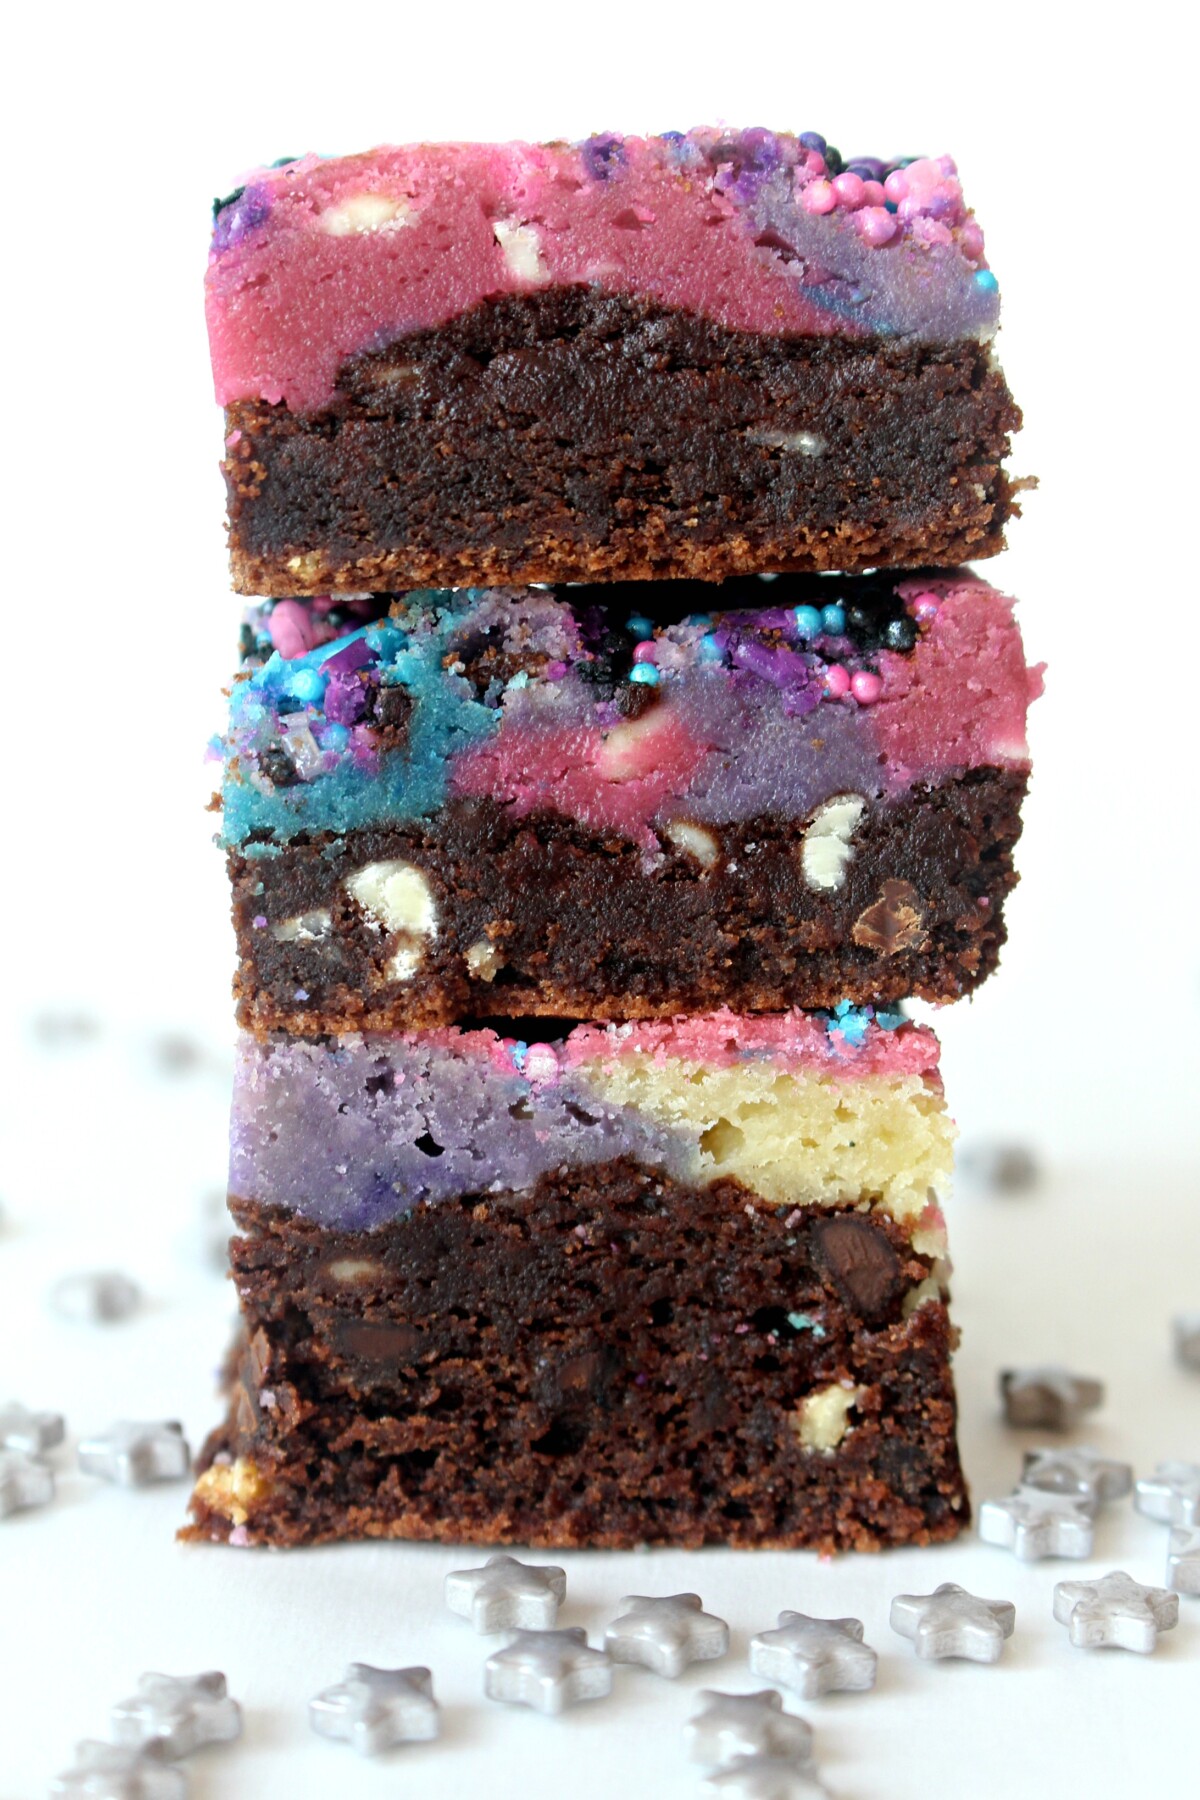 Stack of brownies showing layers of brownie bottoms and colorful blondie tops.